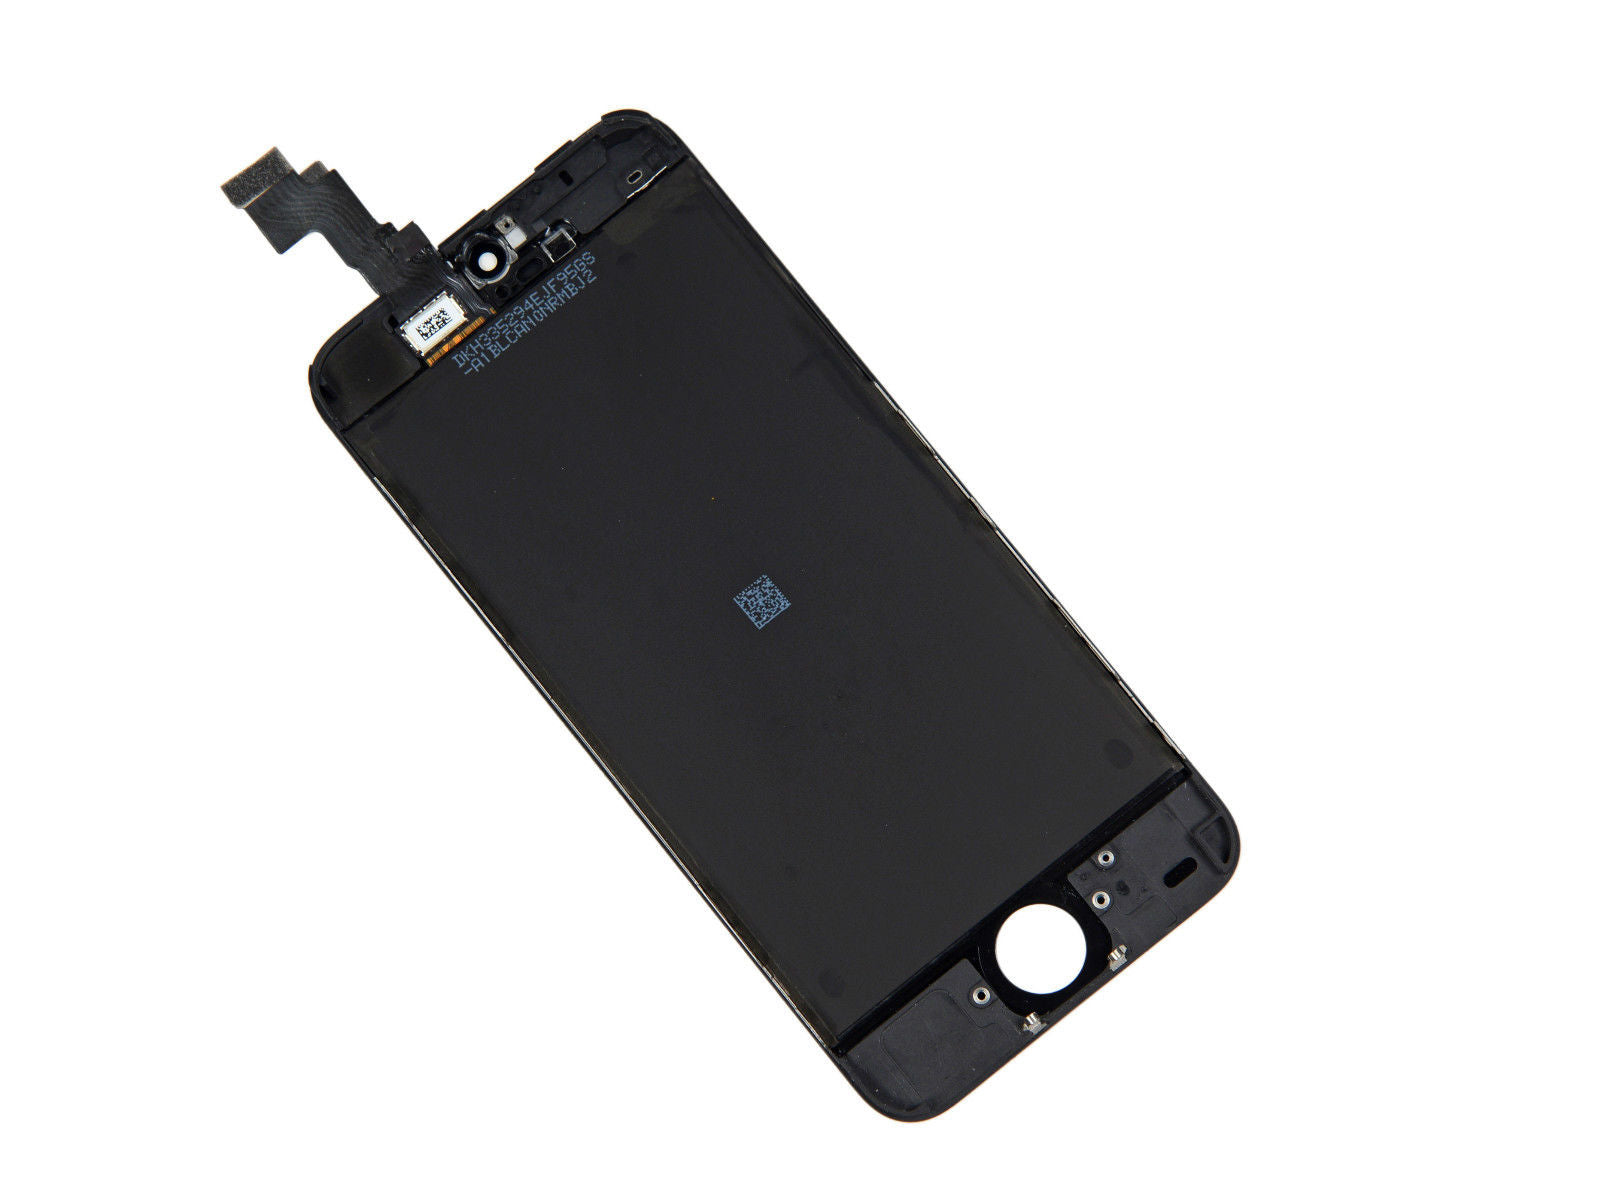 Apple iPhone 5c Replacement LCD Touch Screen Assembly - Black for [product_price] - First Help Tech